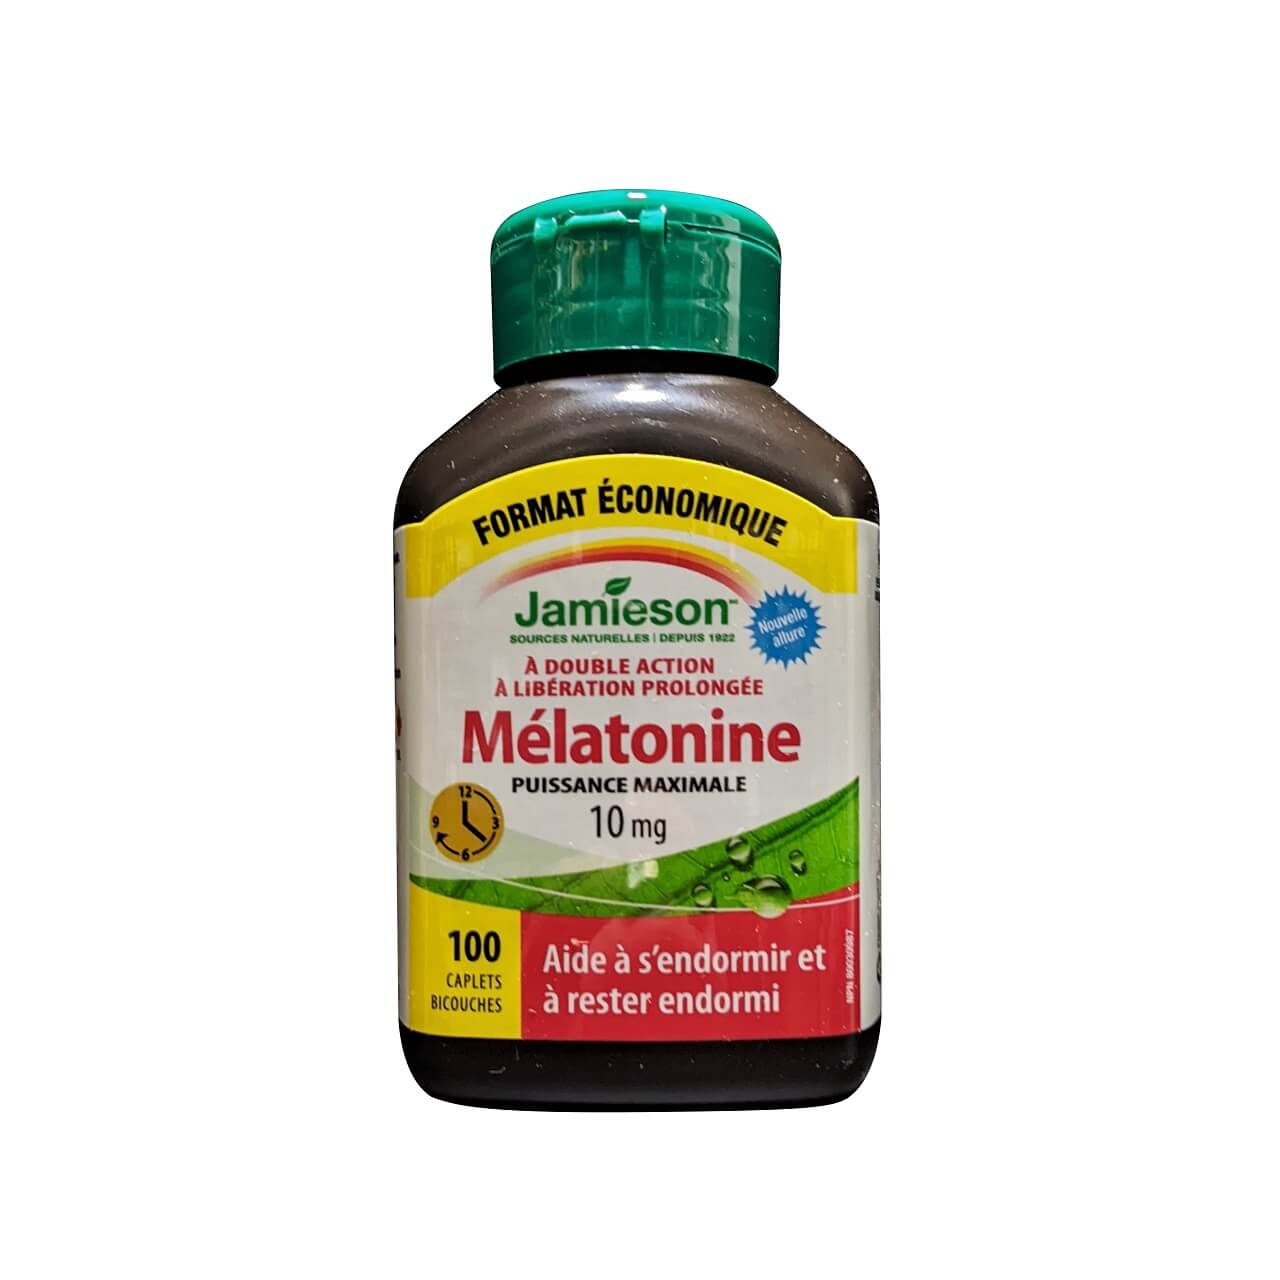 Product label for Jamieson Melatonin 10 mg Maximum Strength Dual Action Timed Release (100 caplets) in French